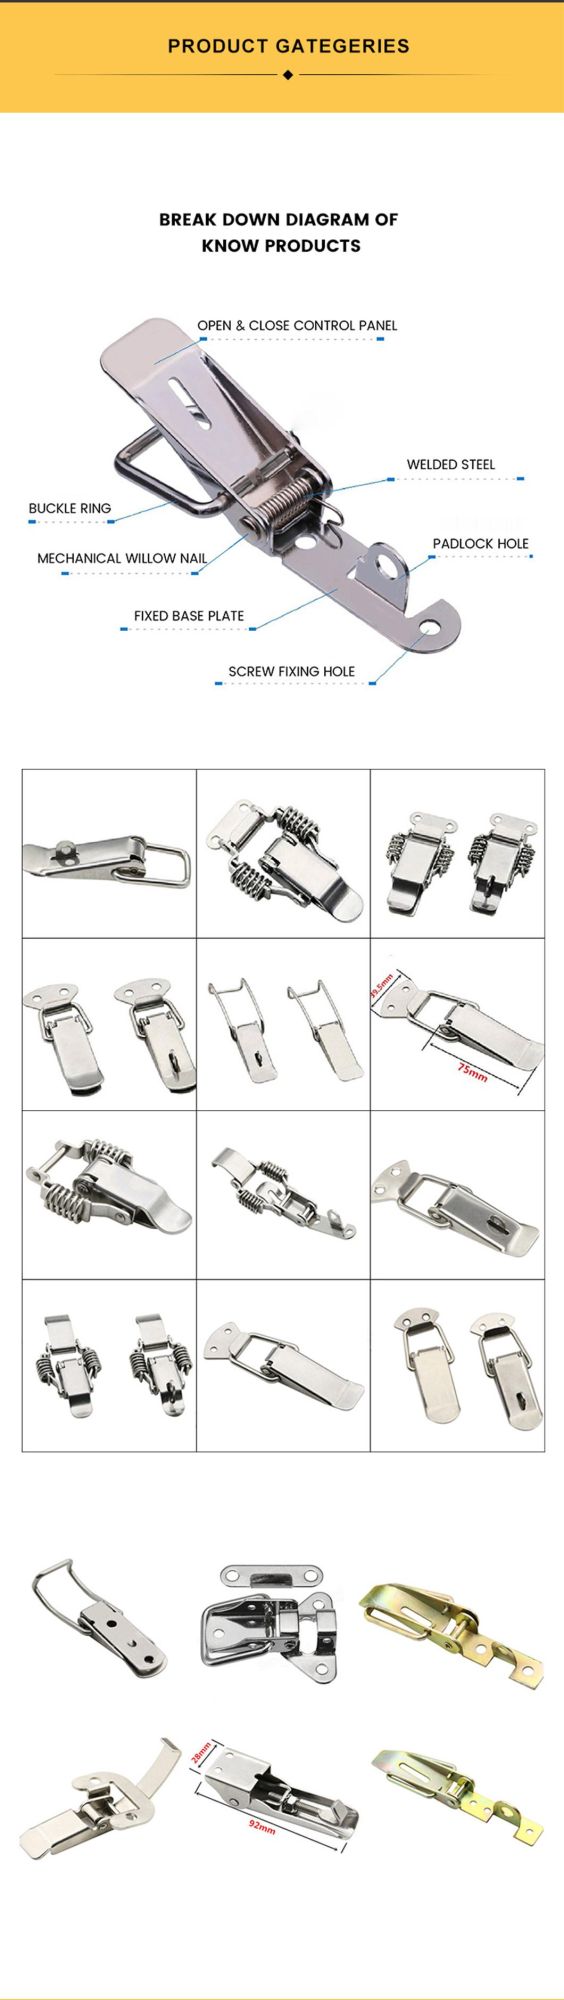 Stainless Steel 316 Mold Toggle Latch Hasp Lock Marine Adjustable Heavy Duty Clamps